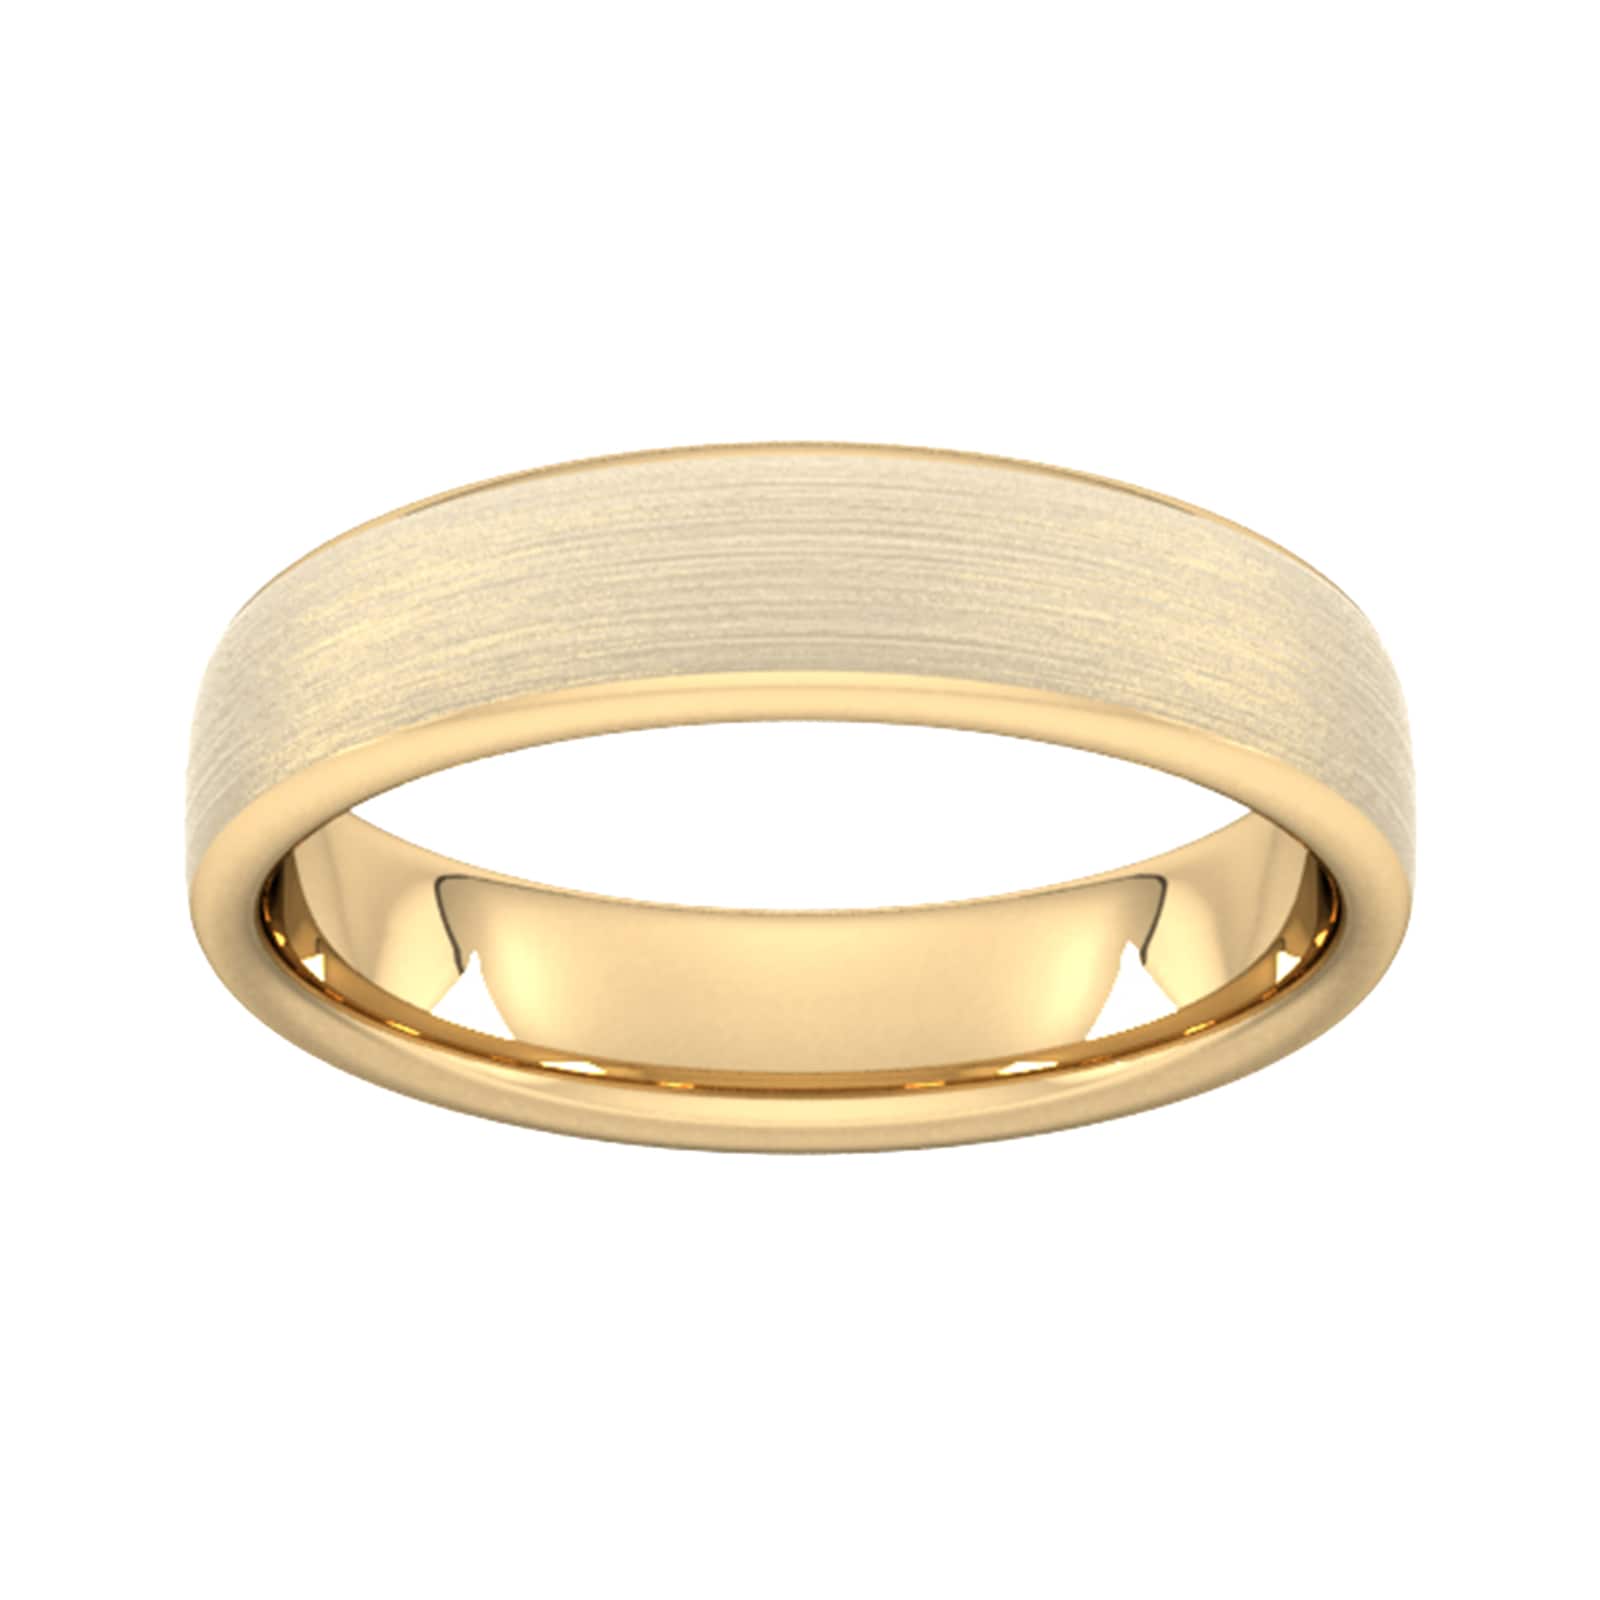 5mm D Shape Heavy Matt Finished Wedding Ring In 9 Carat Yellow Gold - Ring Size N